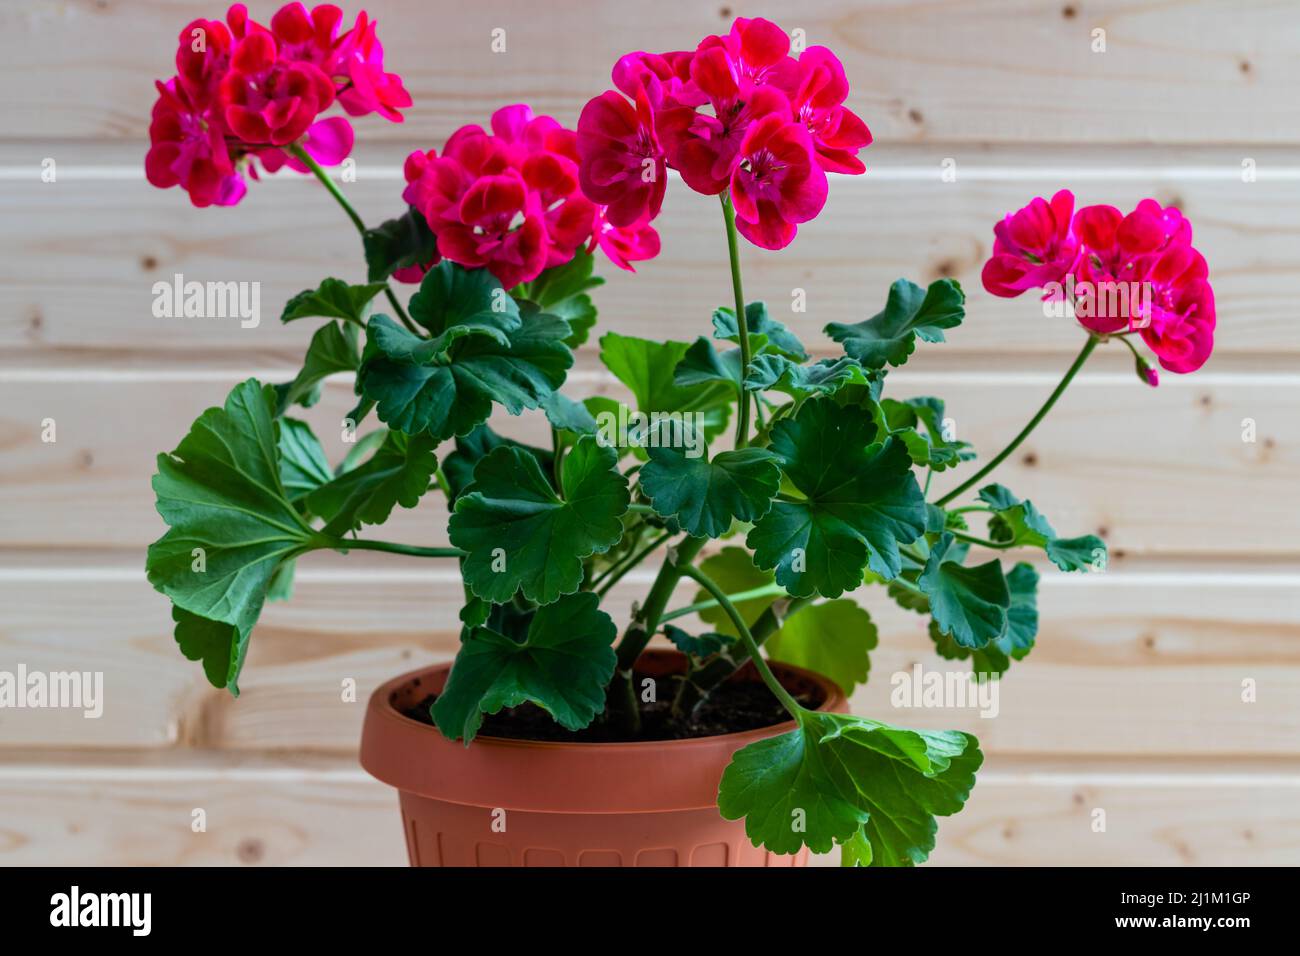 Close-up picture of a pot with a geranium with pink flowers, in home; concept of gardening at home Stock Photo